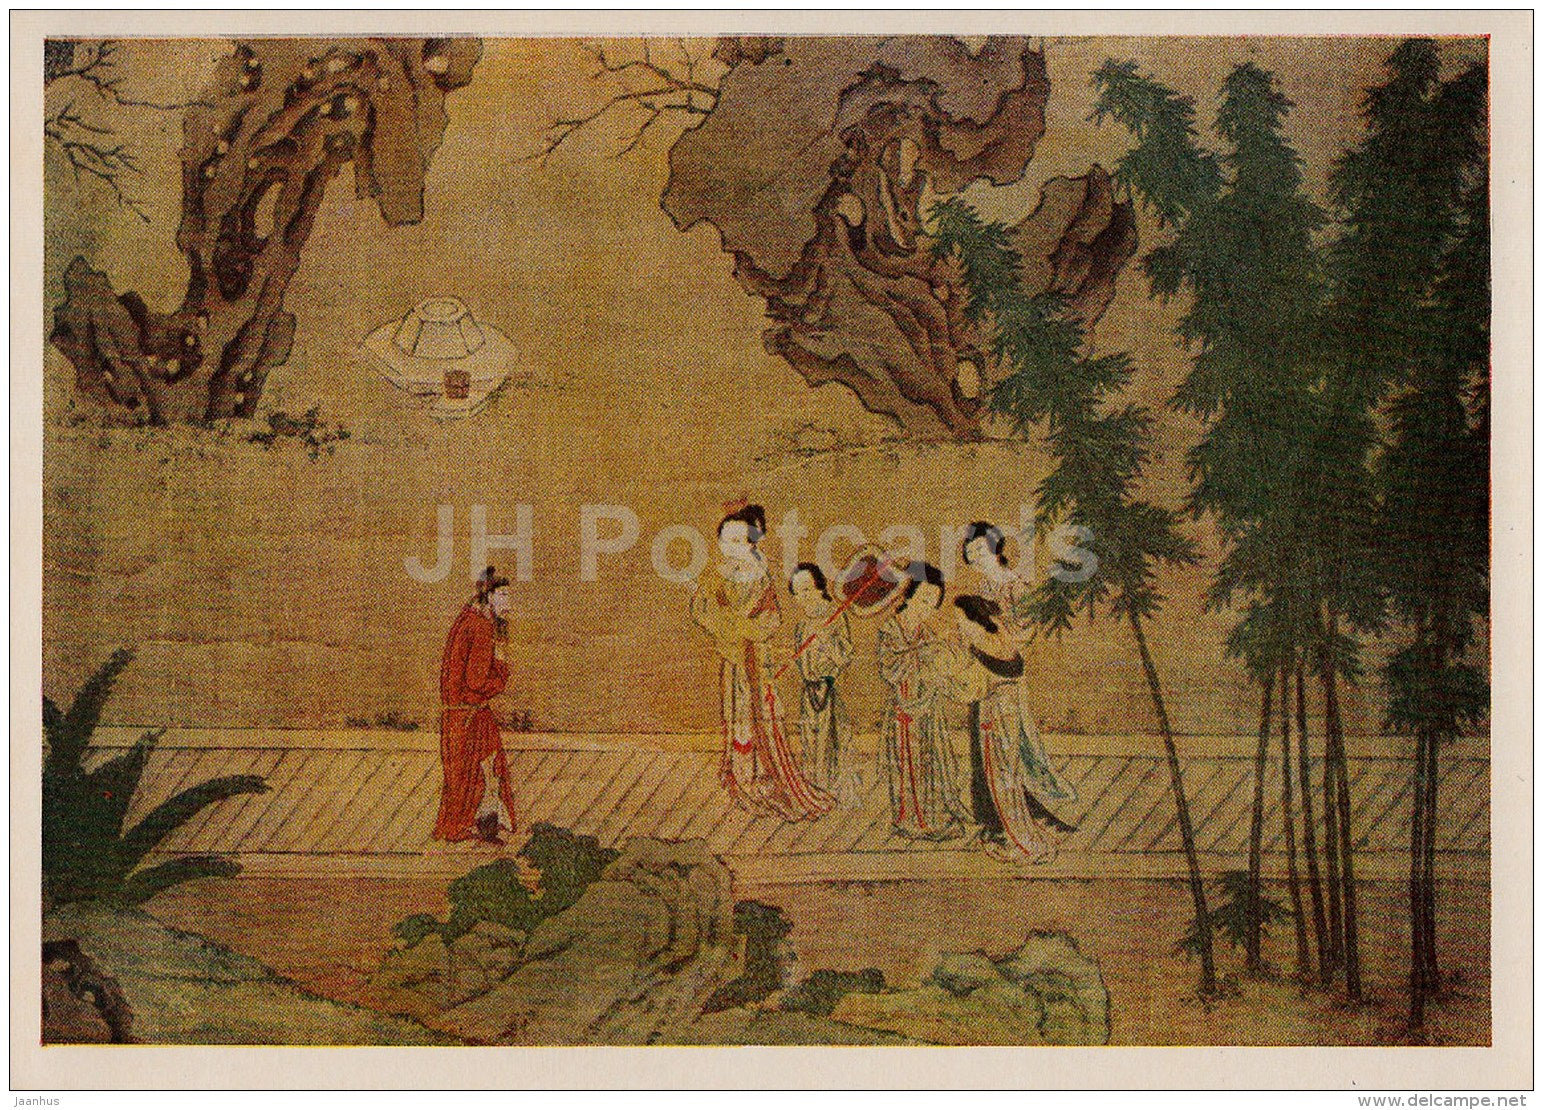 Painting by Qiu Ying - Poem of the abandoned wife - Chinese art - 1956 - Russia USSR - unused - JH Postcards